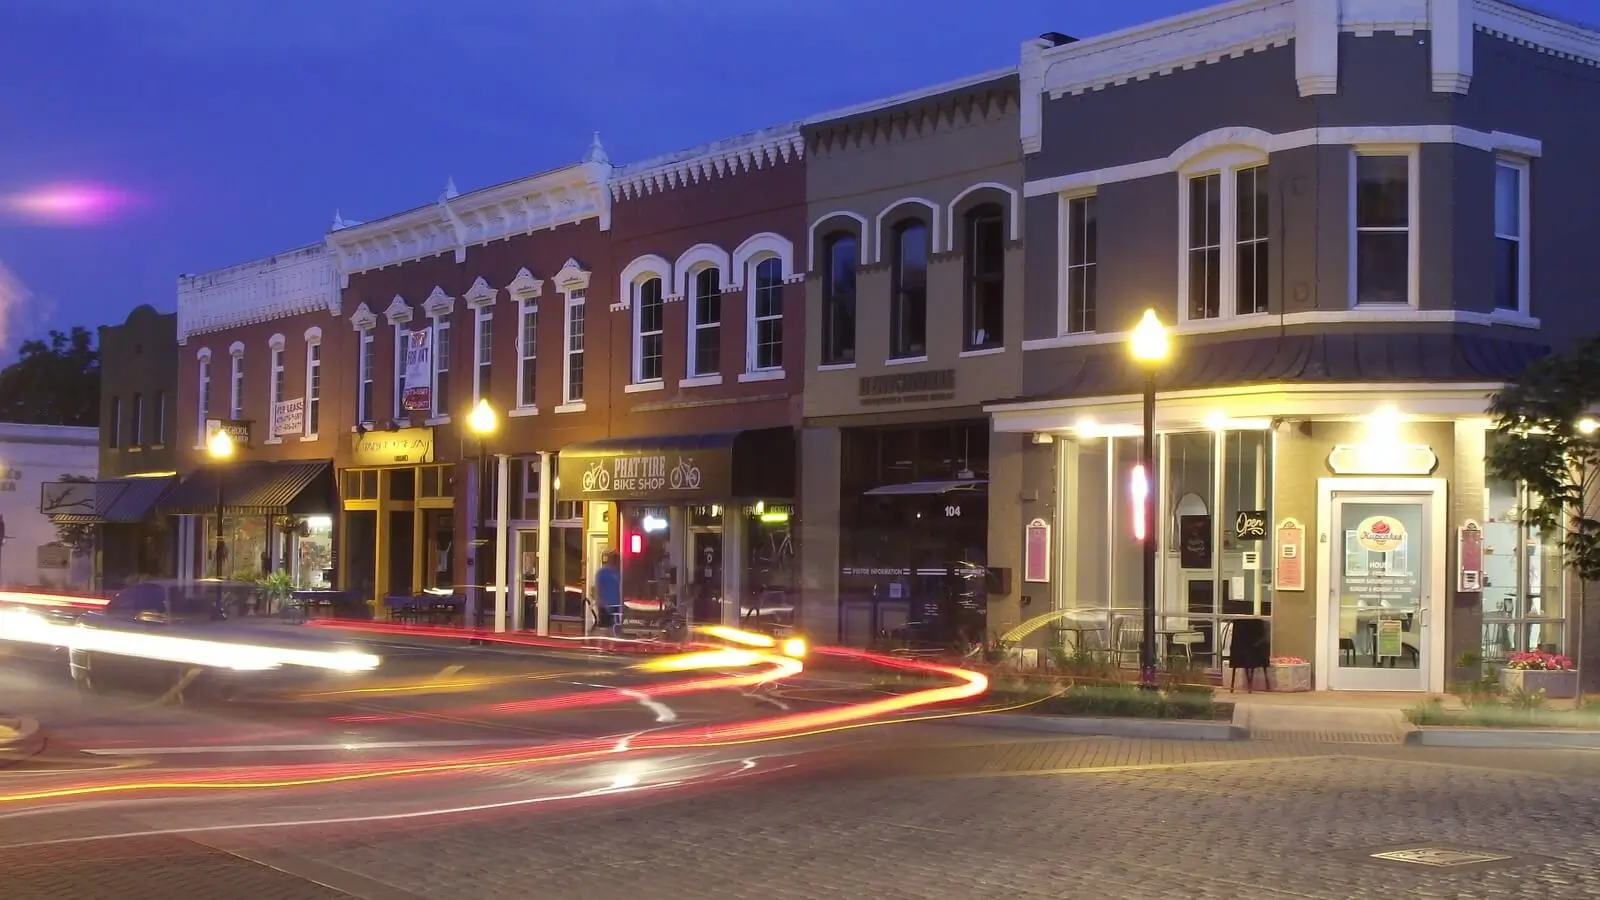 Central Avenue on the Bentonville square at night